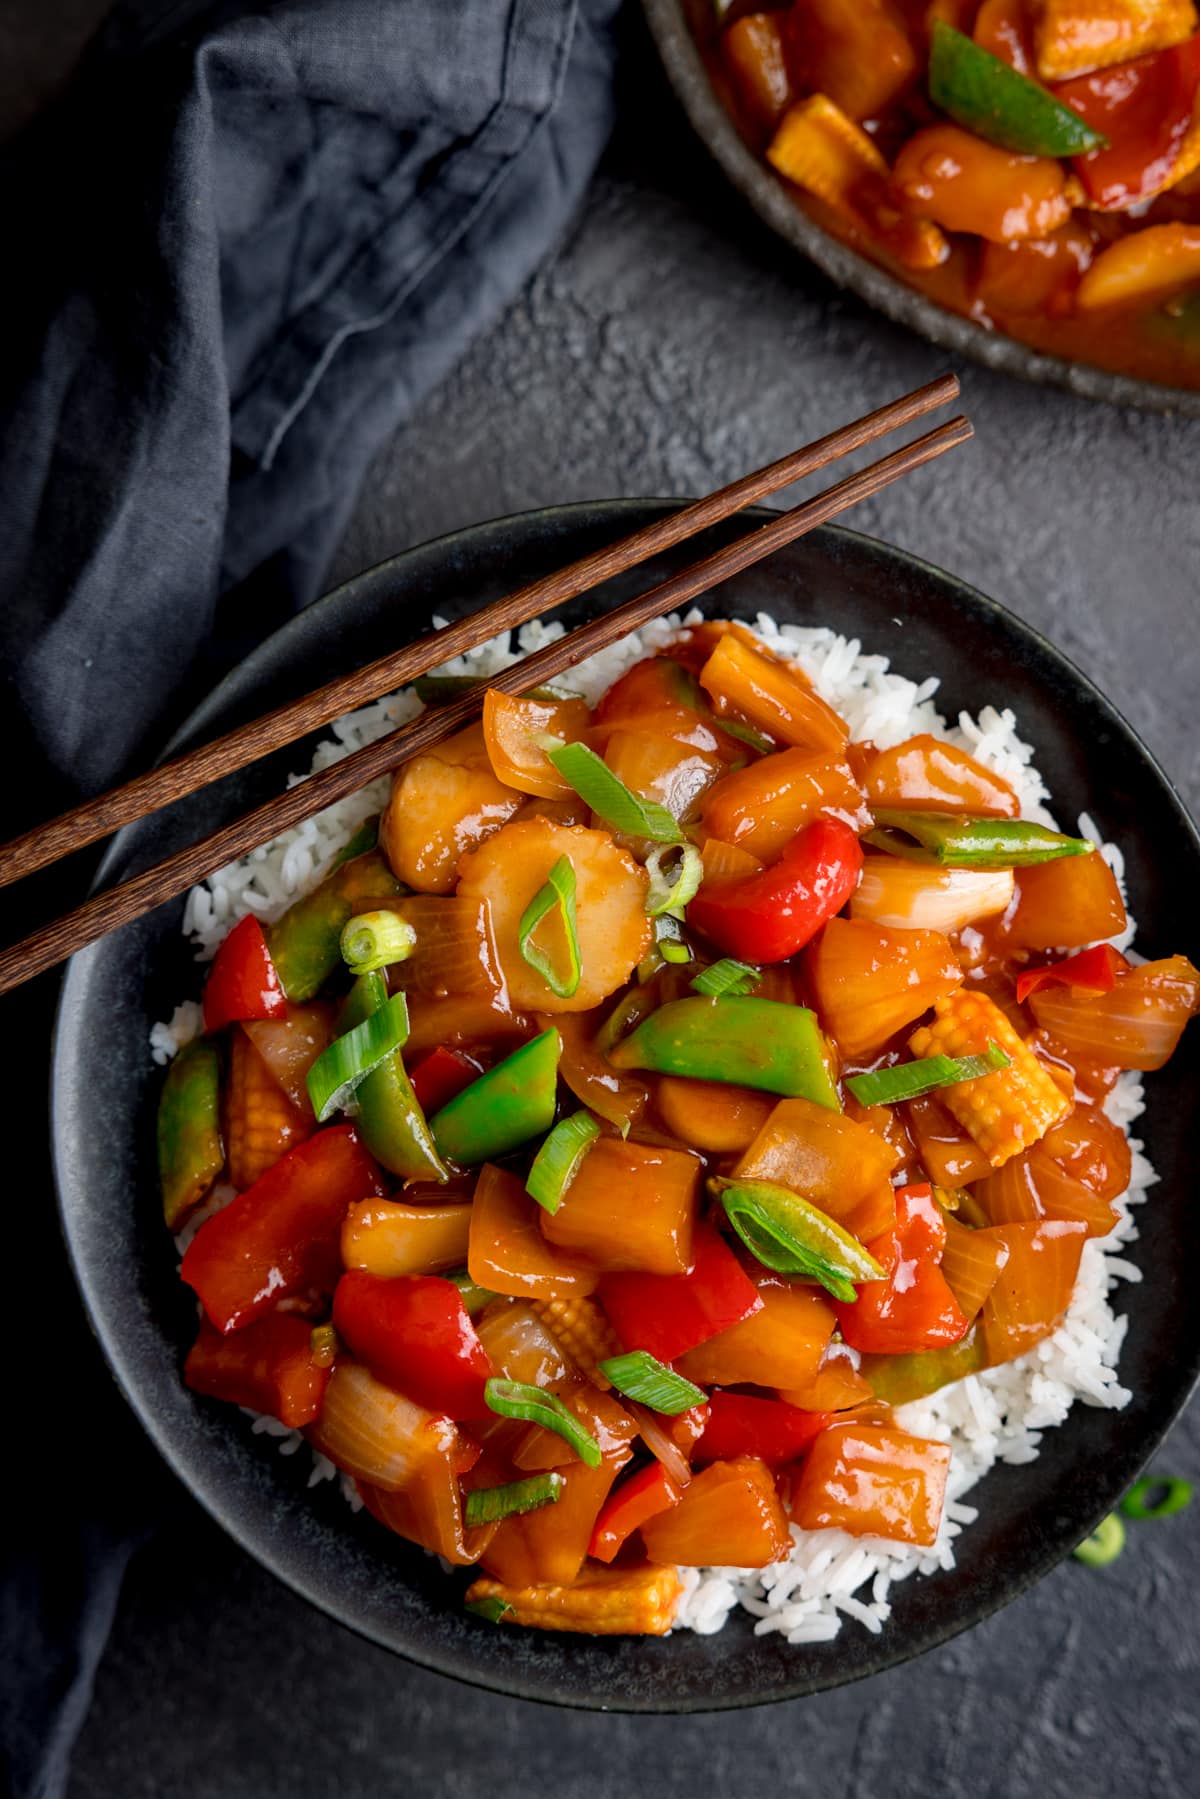 Sweet and sour vegetables on a bed of rice in a black bowl on a dark surface. There is a further bowl of sweet and sour vegetables just in shot at the top of the image.